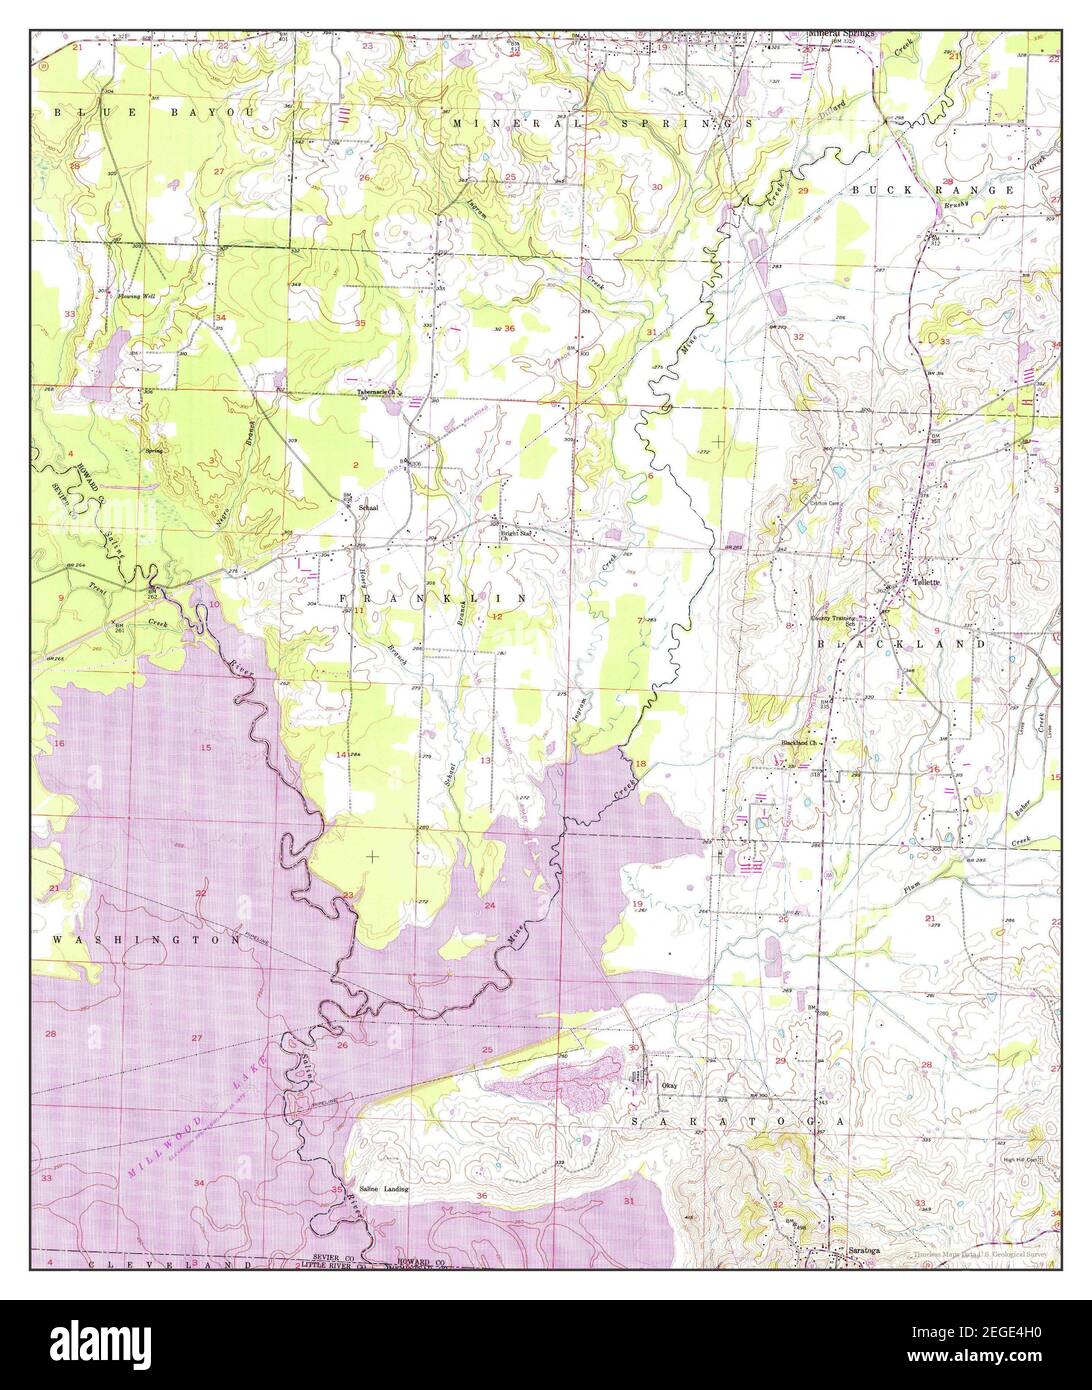 Mineral Springs South, Arkansas, map 1951, 1:24000, United States of America by Timeless Maps, data U.S. Geological Survey Foto Stock